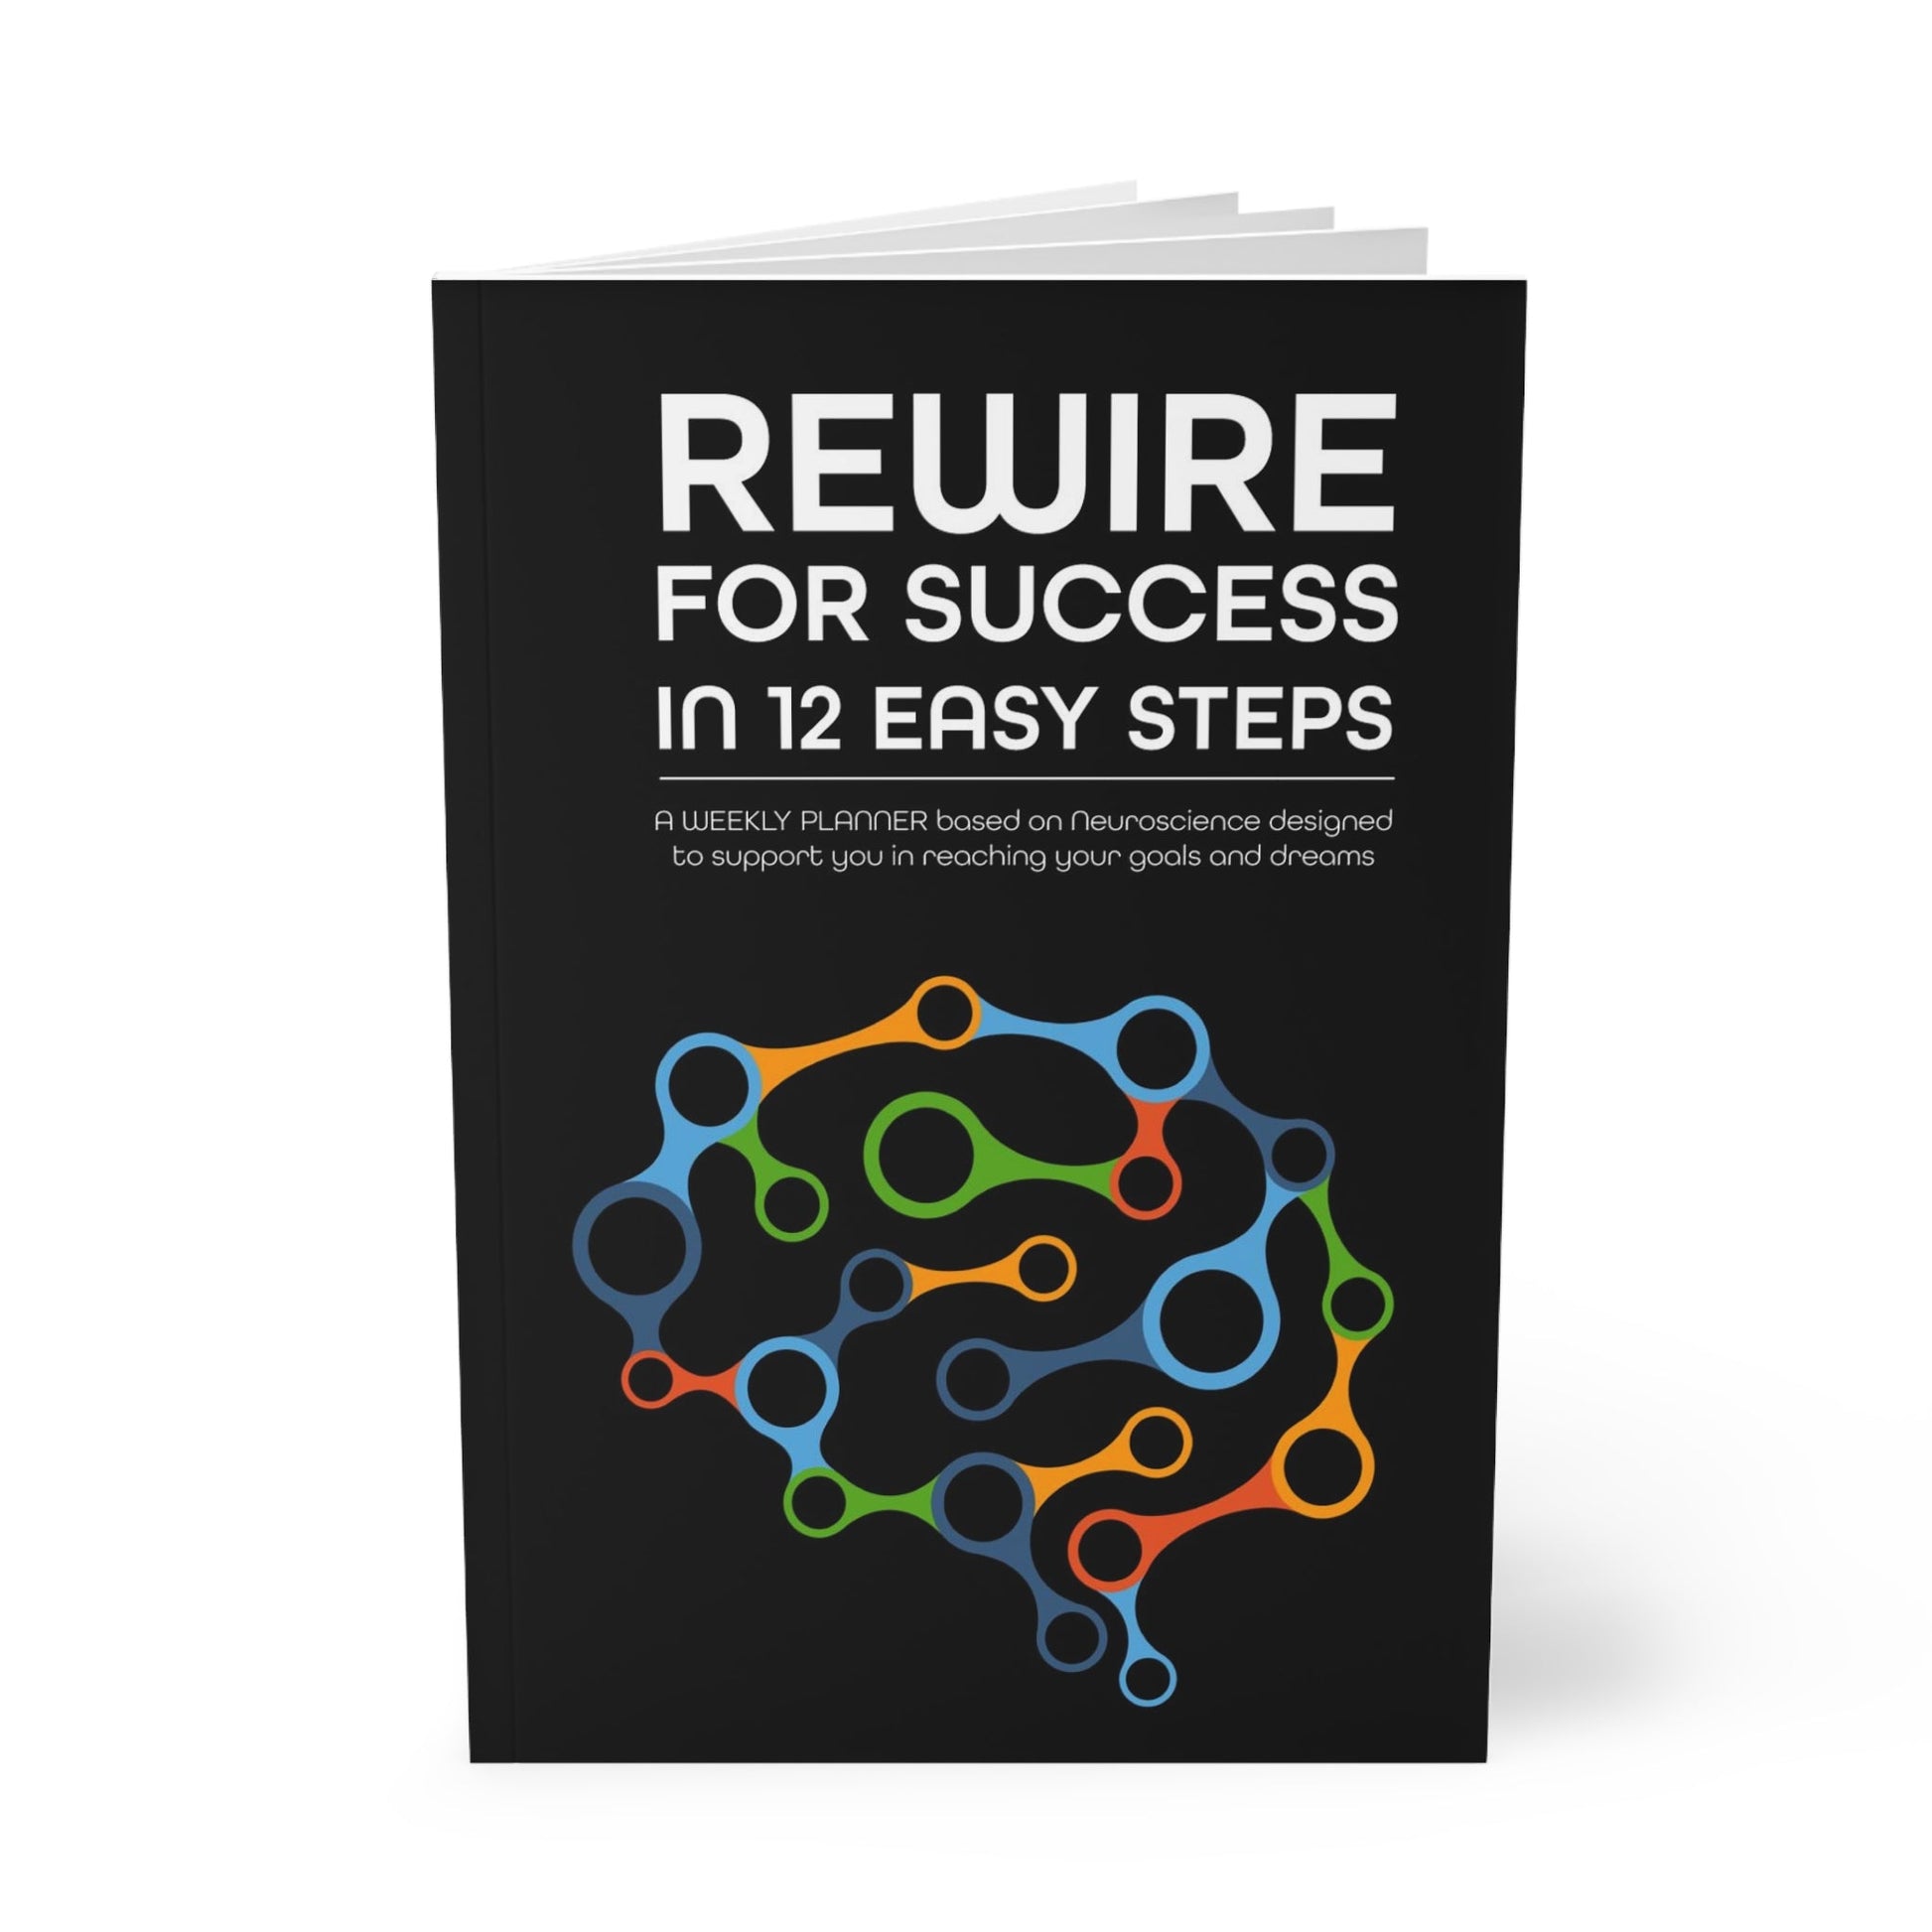 REWIRE FOR SUCCESS IN 12 EASY STEPS - journal